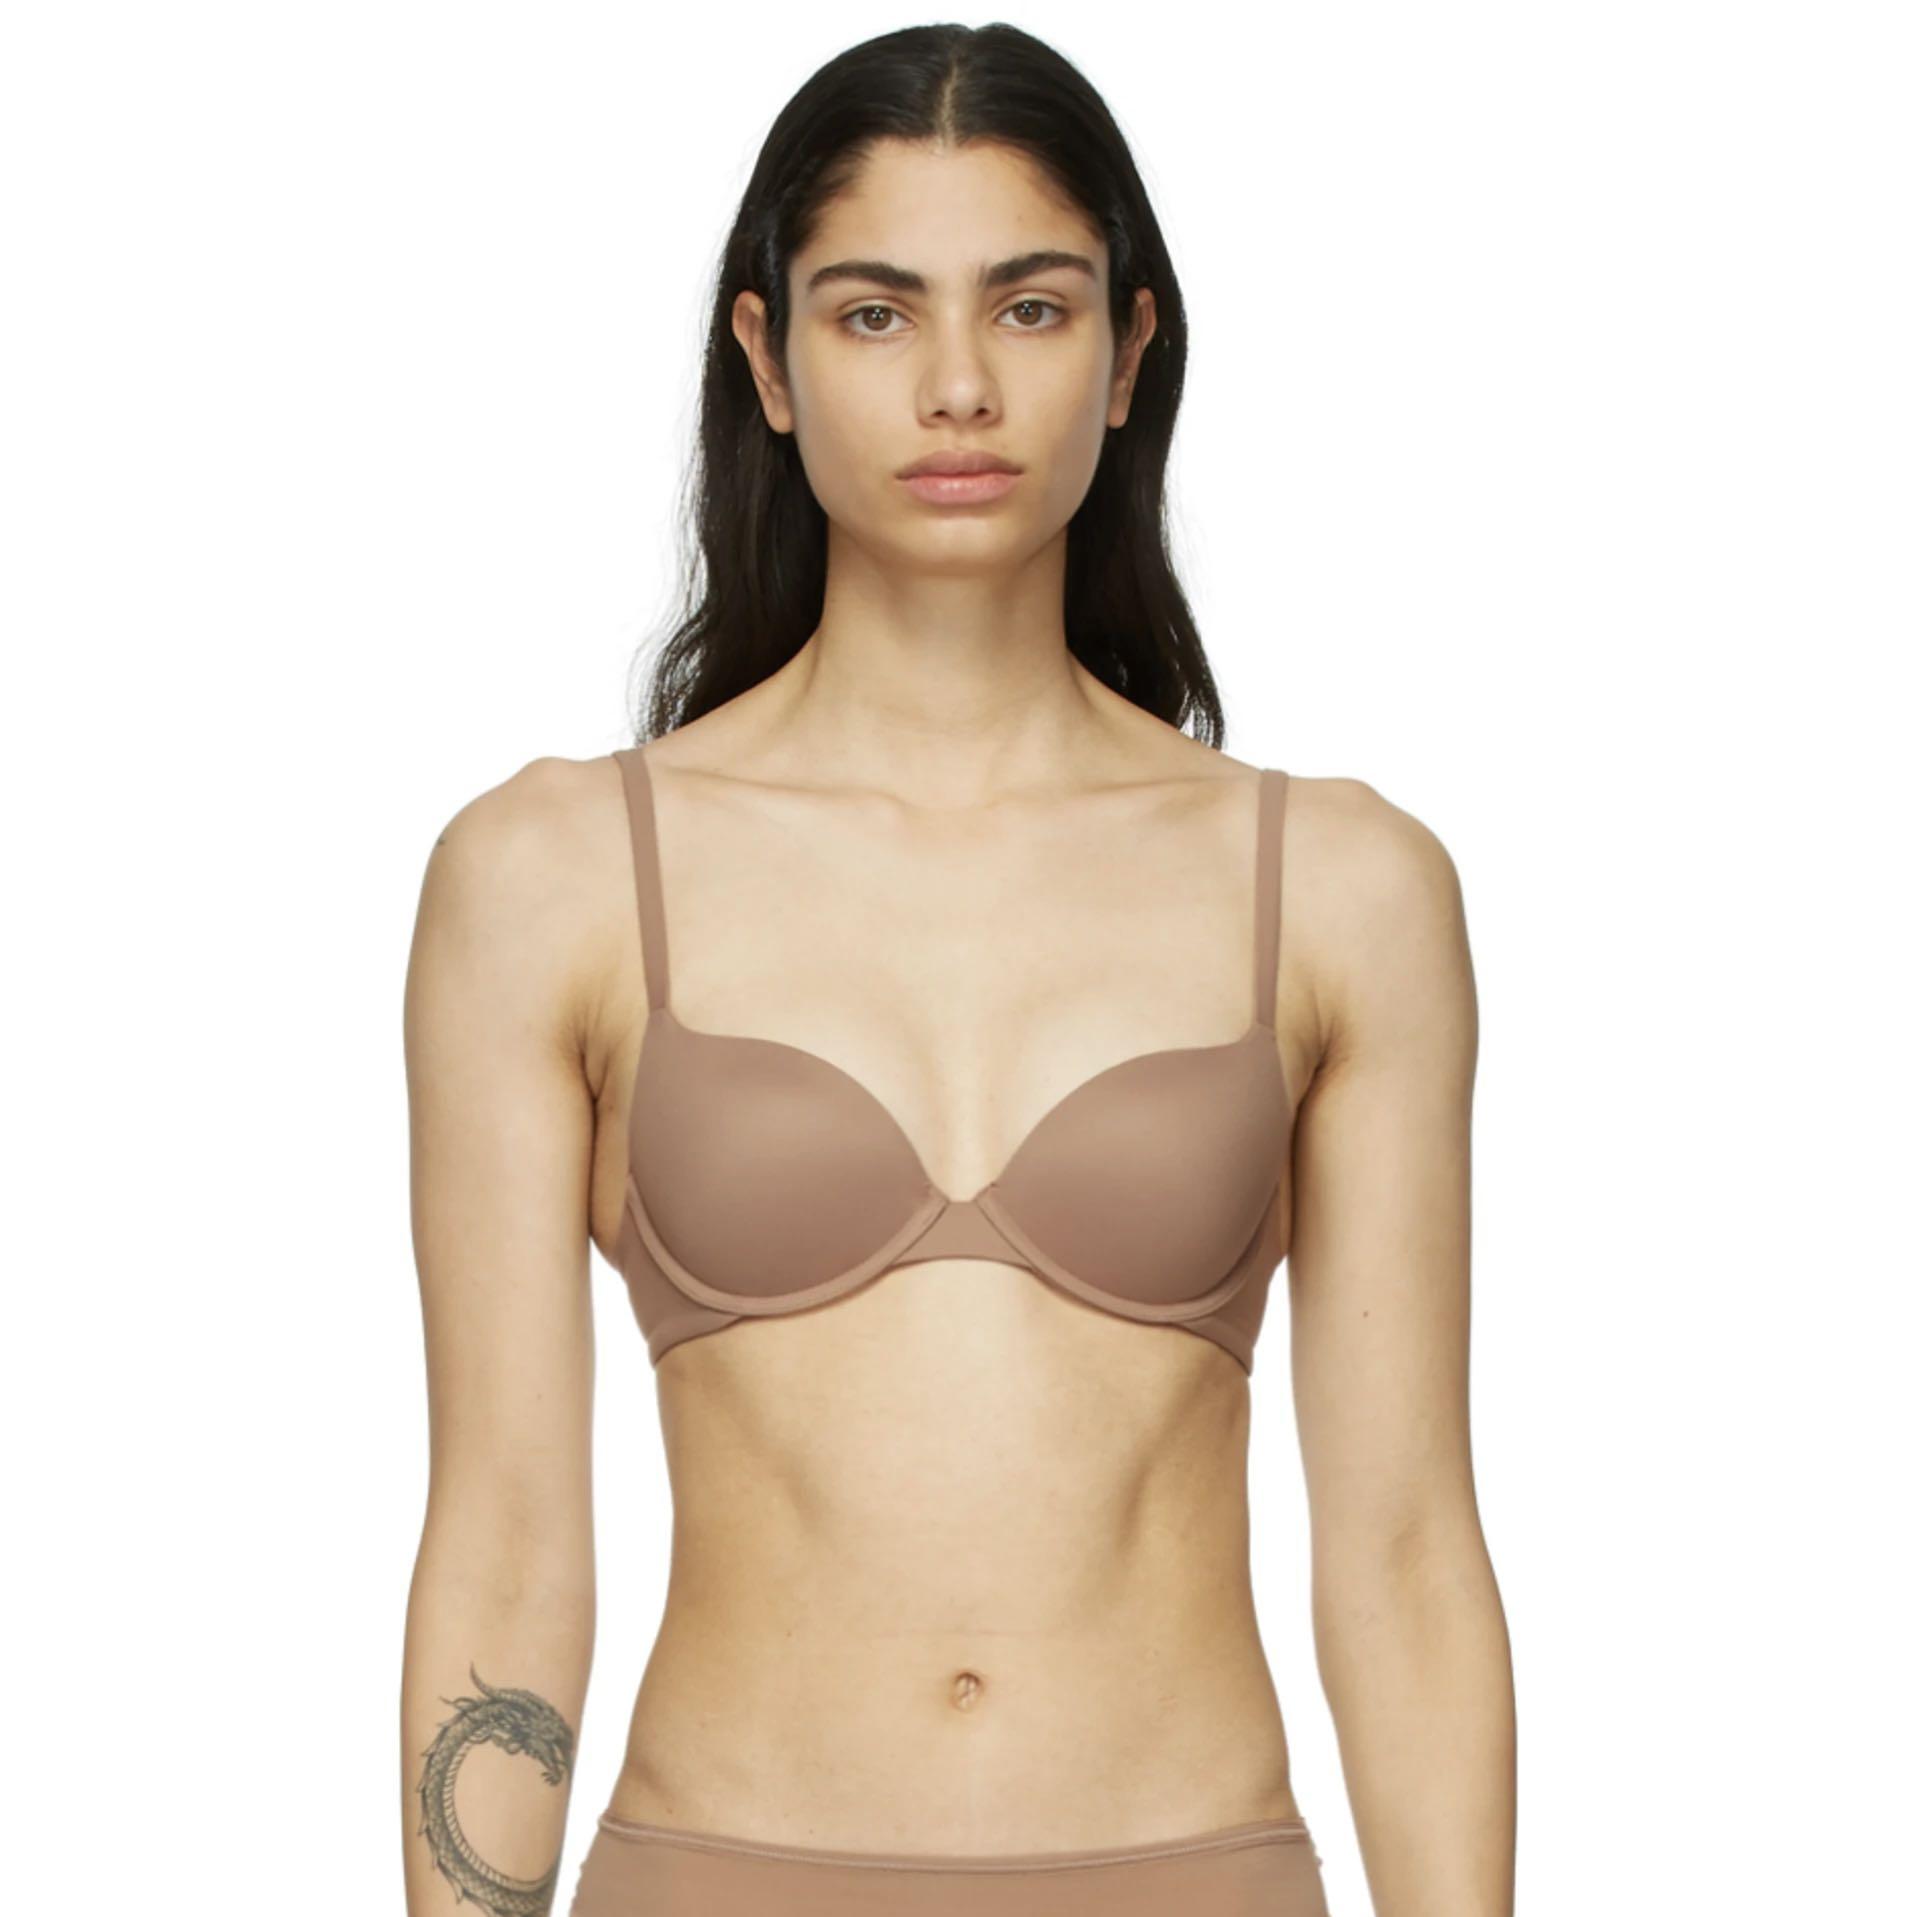 NEW Skims Fits Everybody T-shirt Push Up Bra in Sienna, size 32A, Women's  Fashion, Undergarments & Loungewear on Carousell